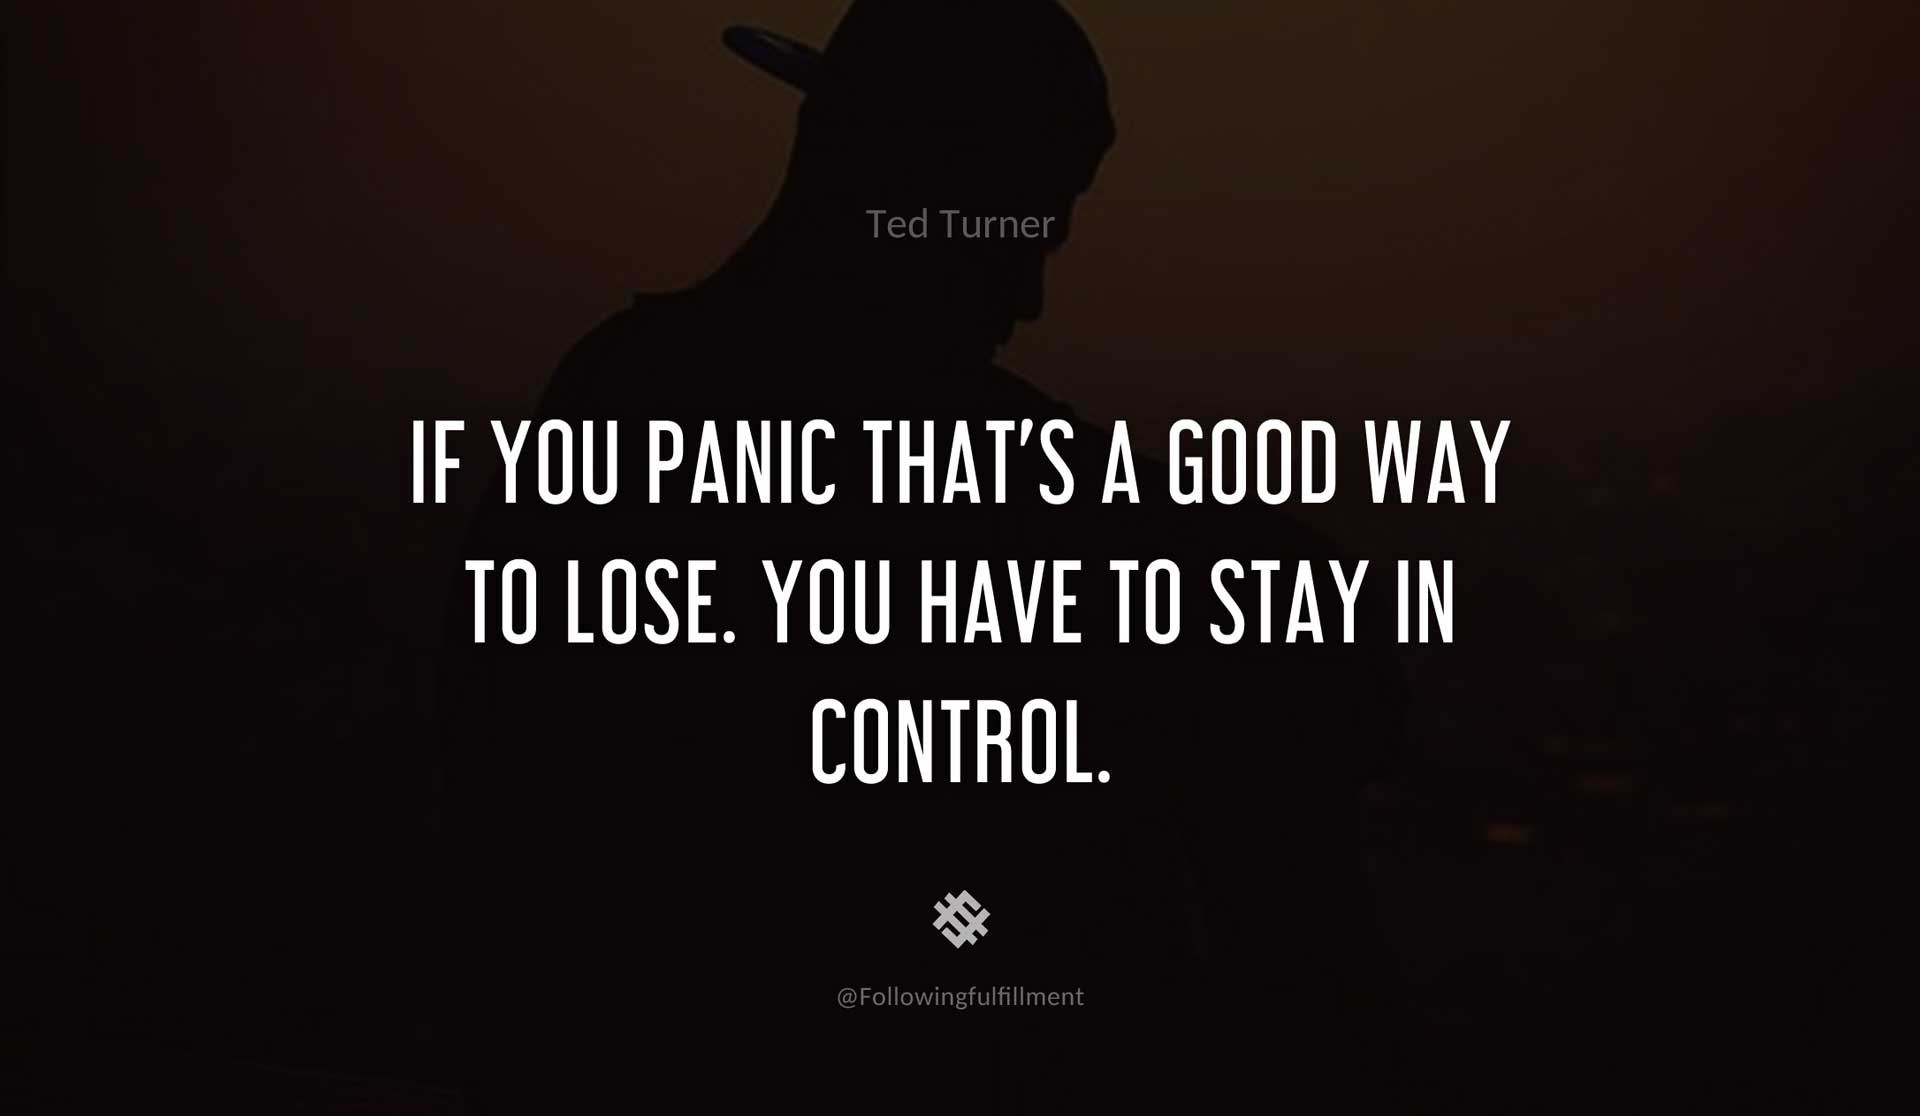 If-you-panic-that's-a-good-way-to-lose.-You-have-to-stay-in-control.-TED-TURNER-Quote.jpg